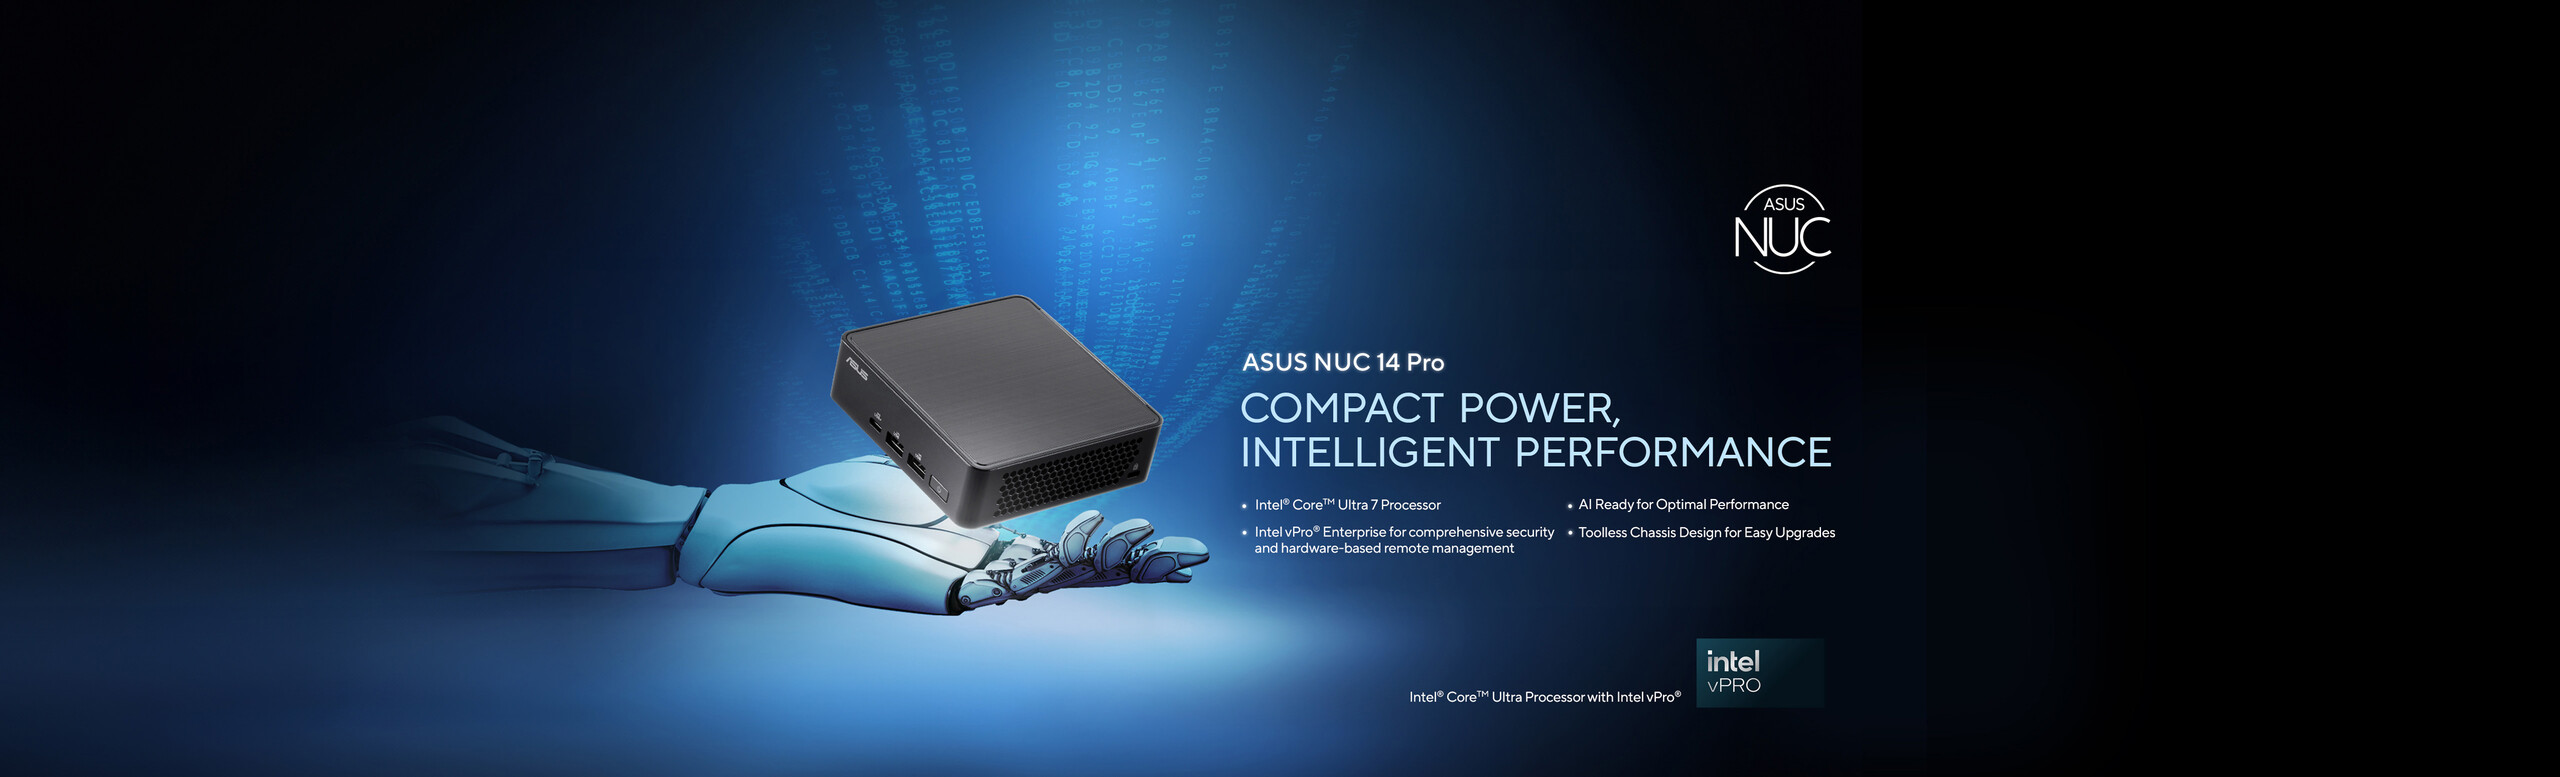 Image of  ASUS NUC 14 Pro  Compact Power, Intelligent Performance